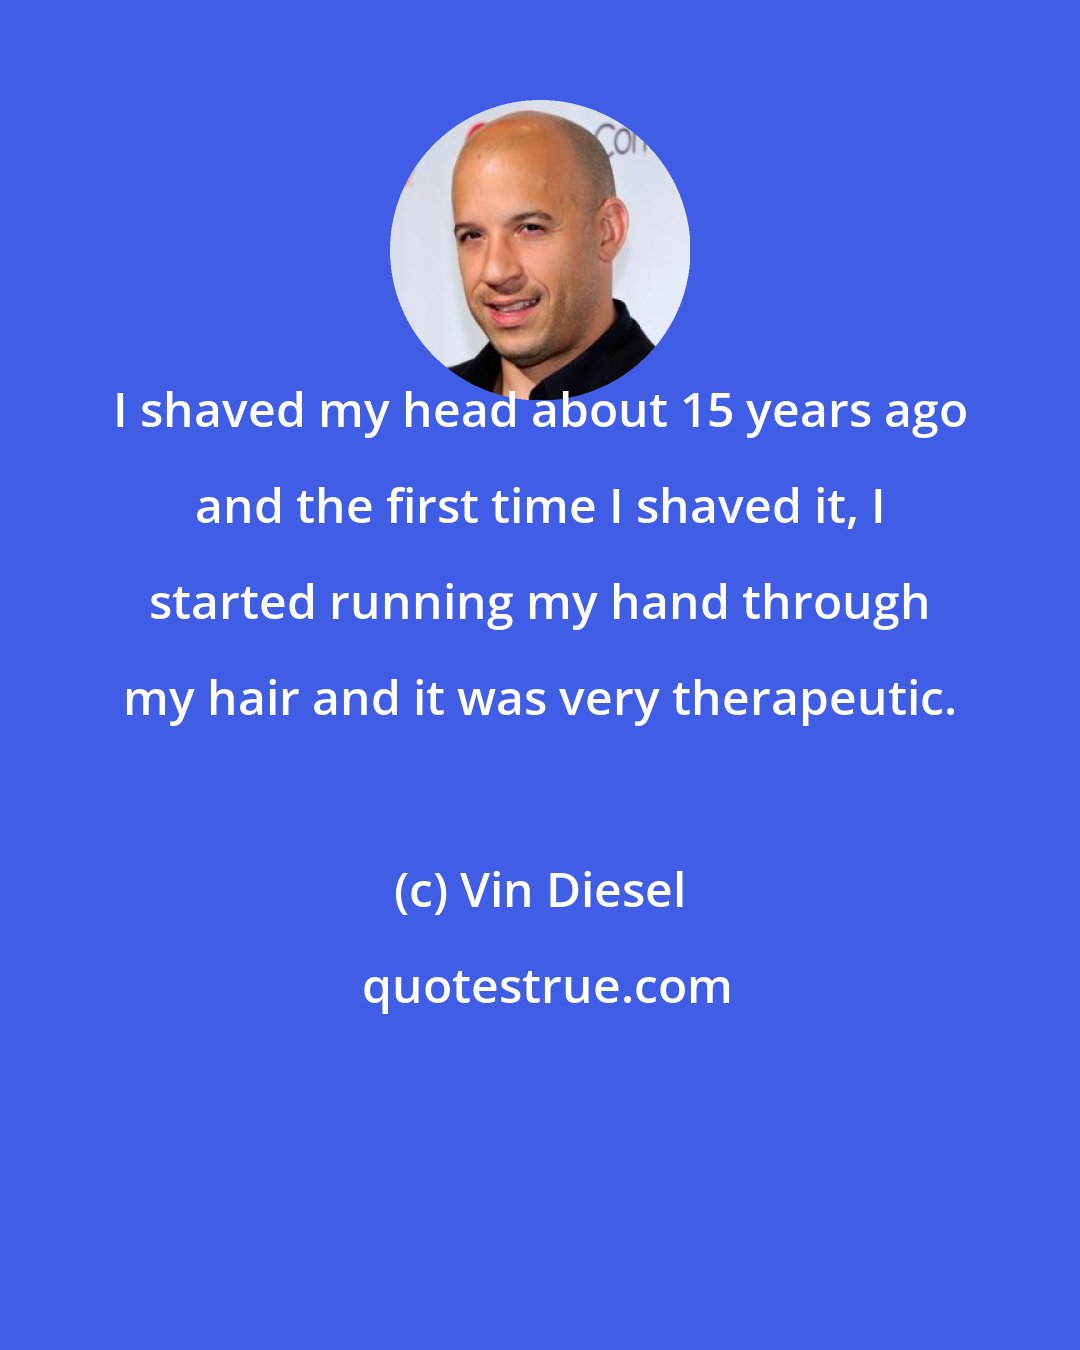 Vin Diesel: I shaved my head about 15 years ago and the first time I shaved it, I started running my hand through my hair and it was very therapeutic.